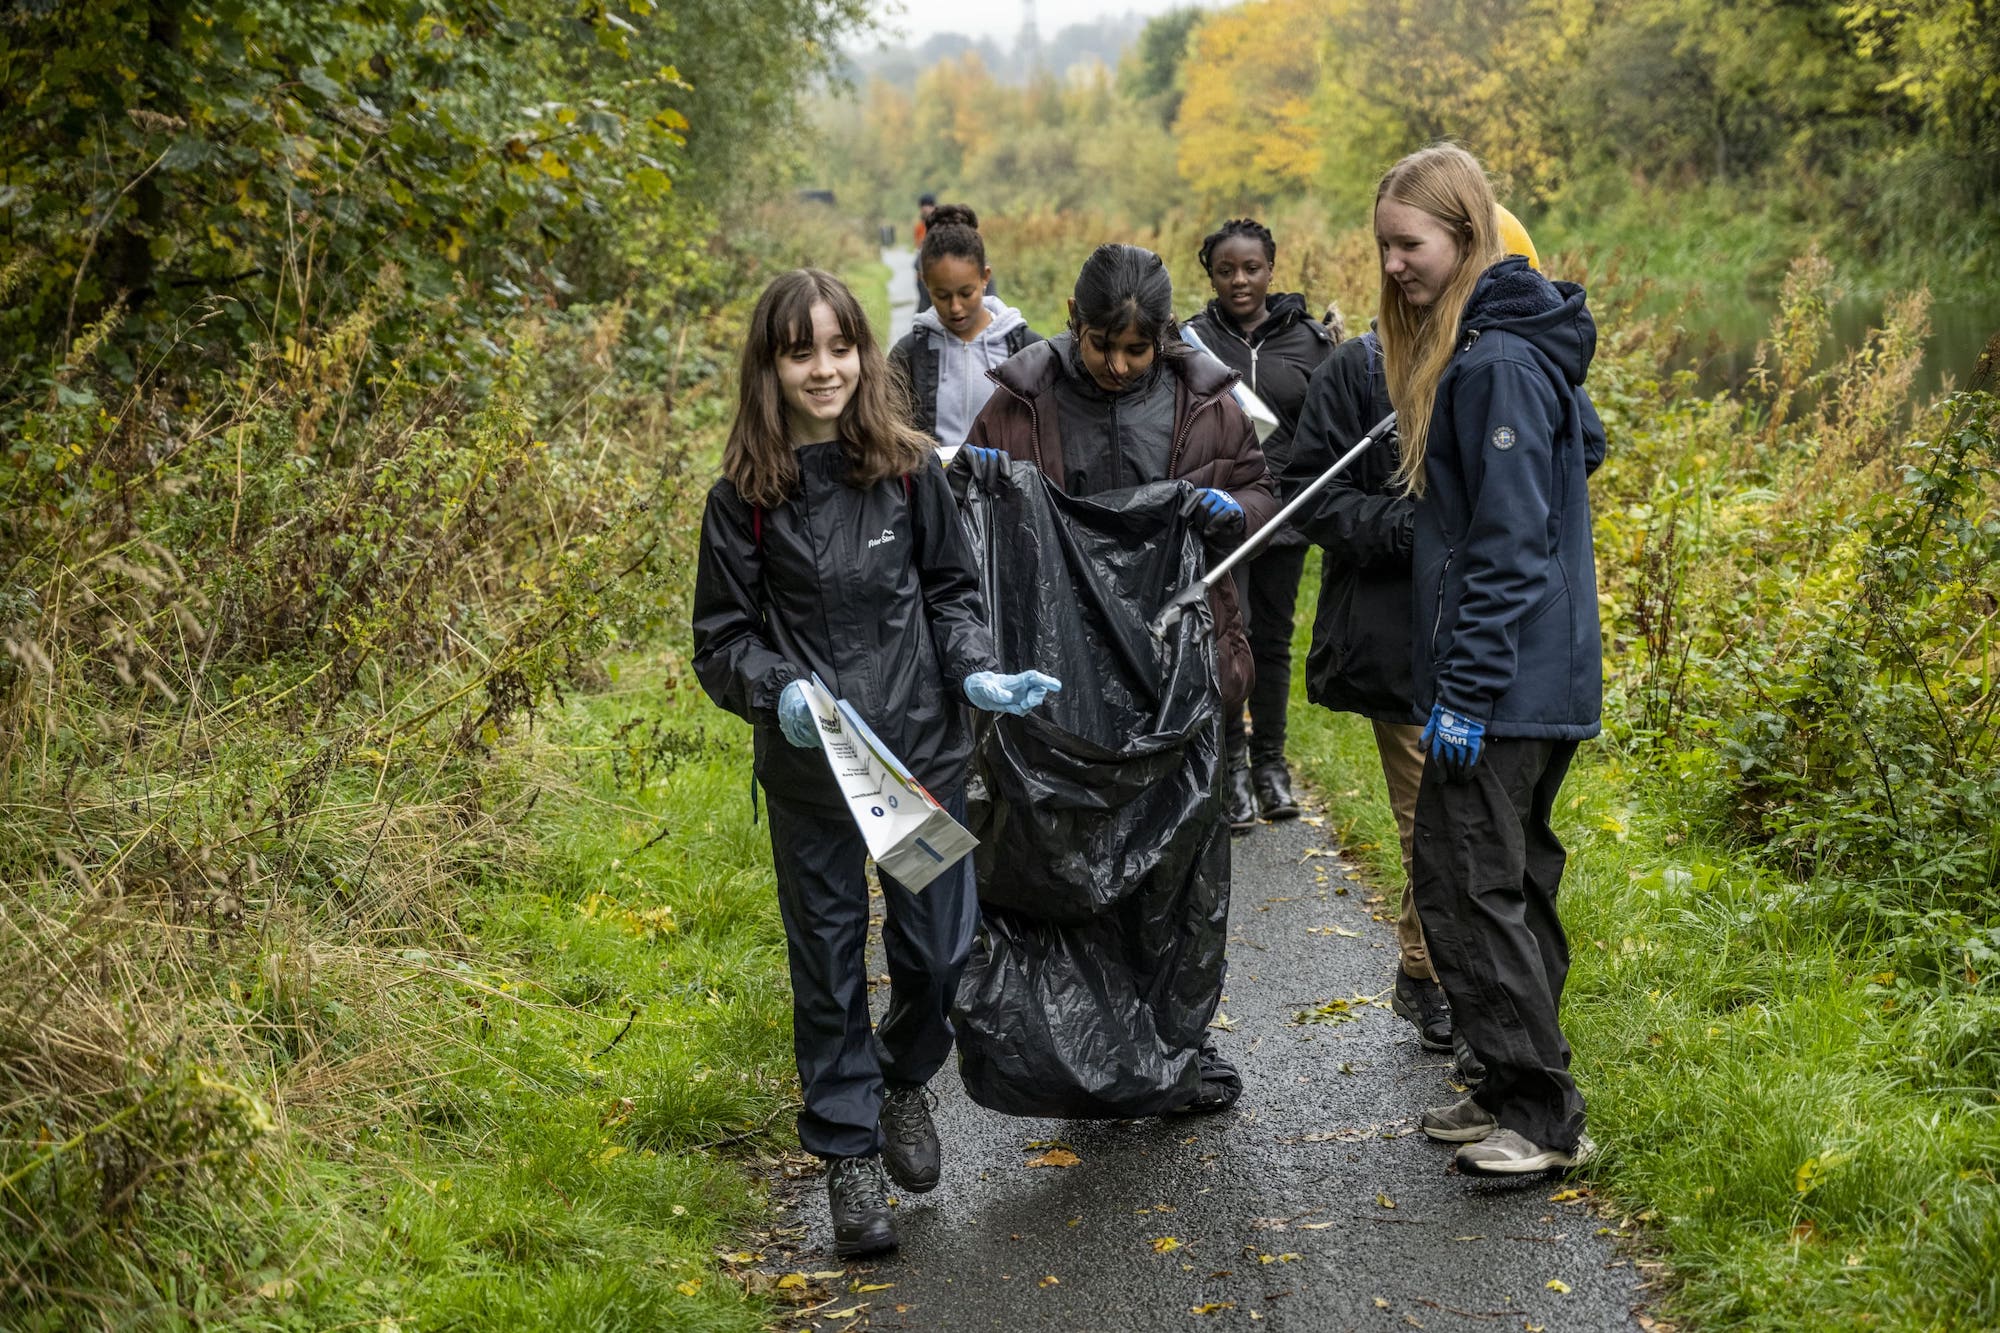 Community action on show in Wester Hailes as residents come together to clean up neighbourhood